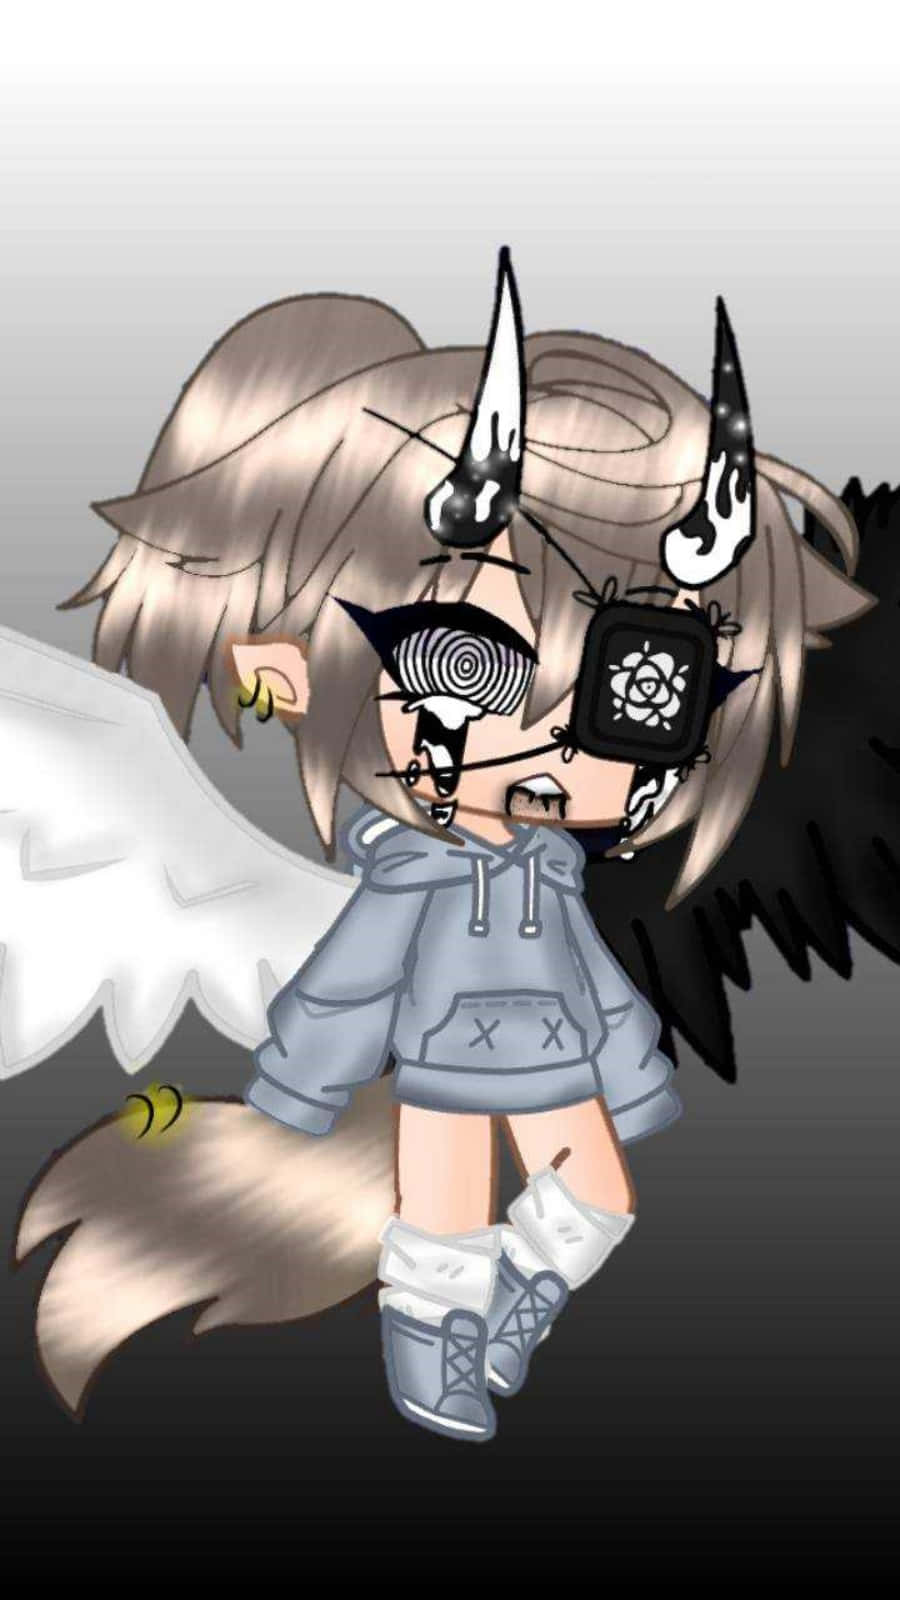 Create Your Own Unique Character With GachaLife!